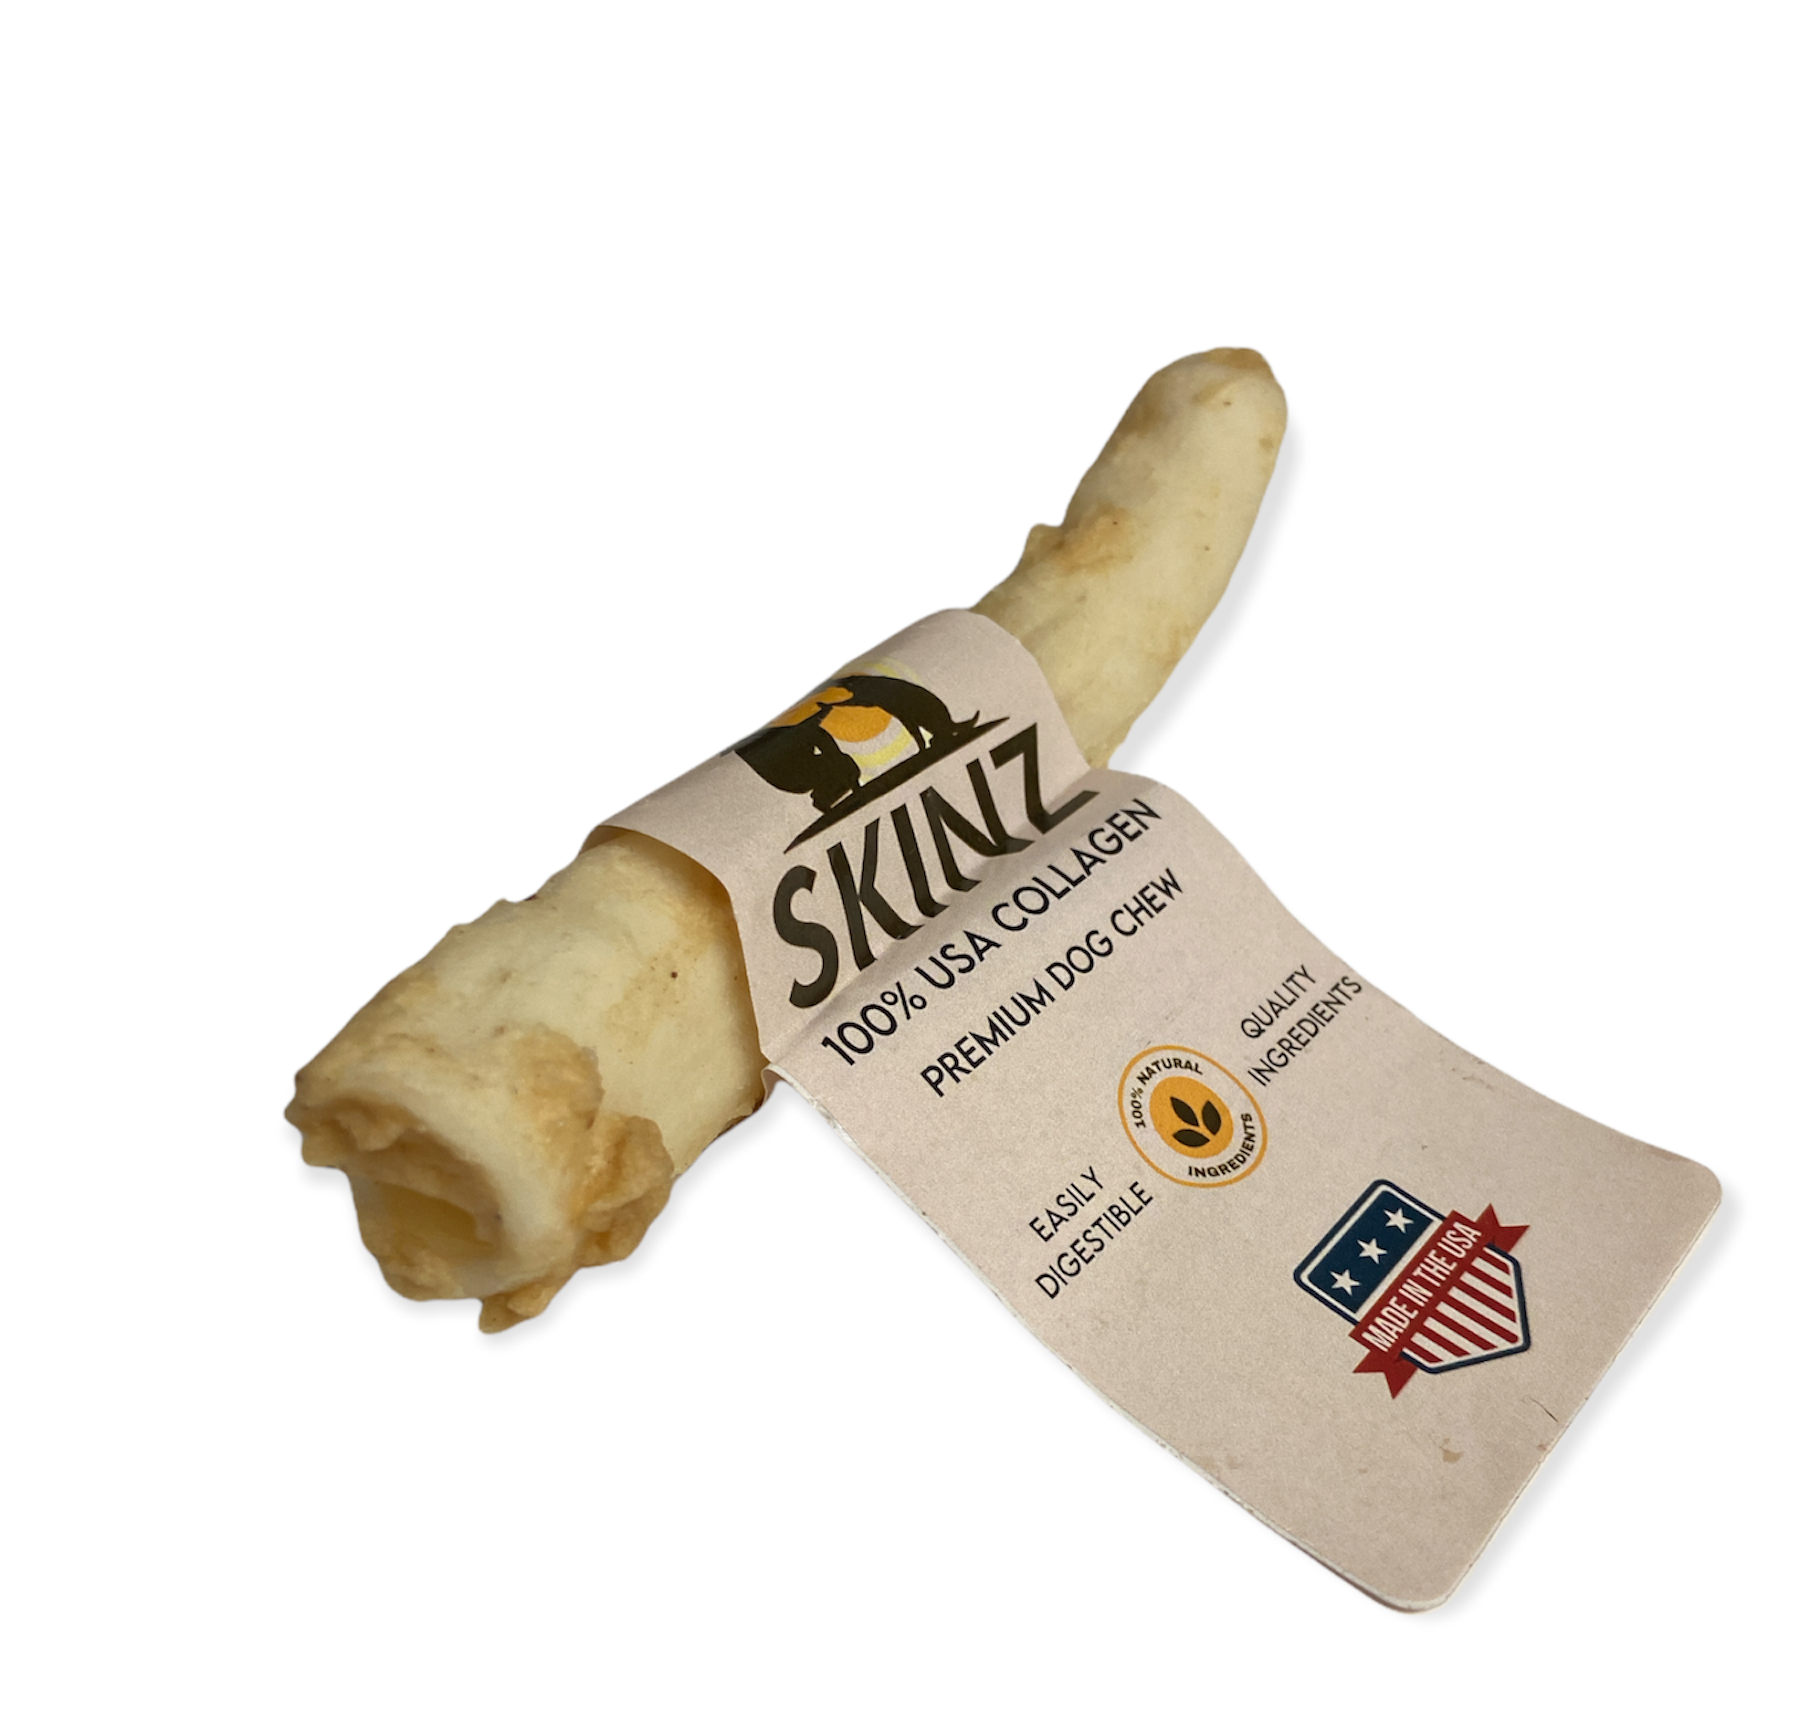 Skinz Bully Stick Flavored 100% Collagen Roll Dog Chew